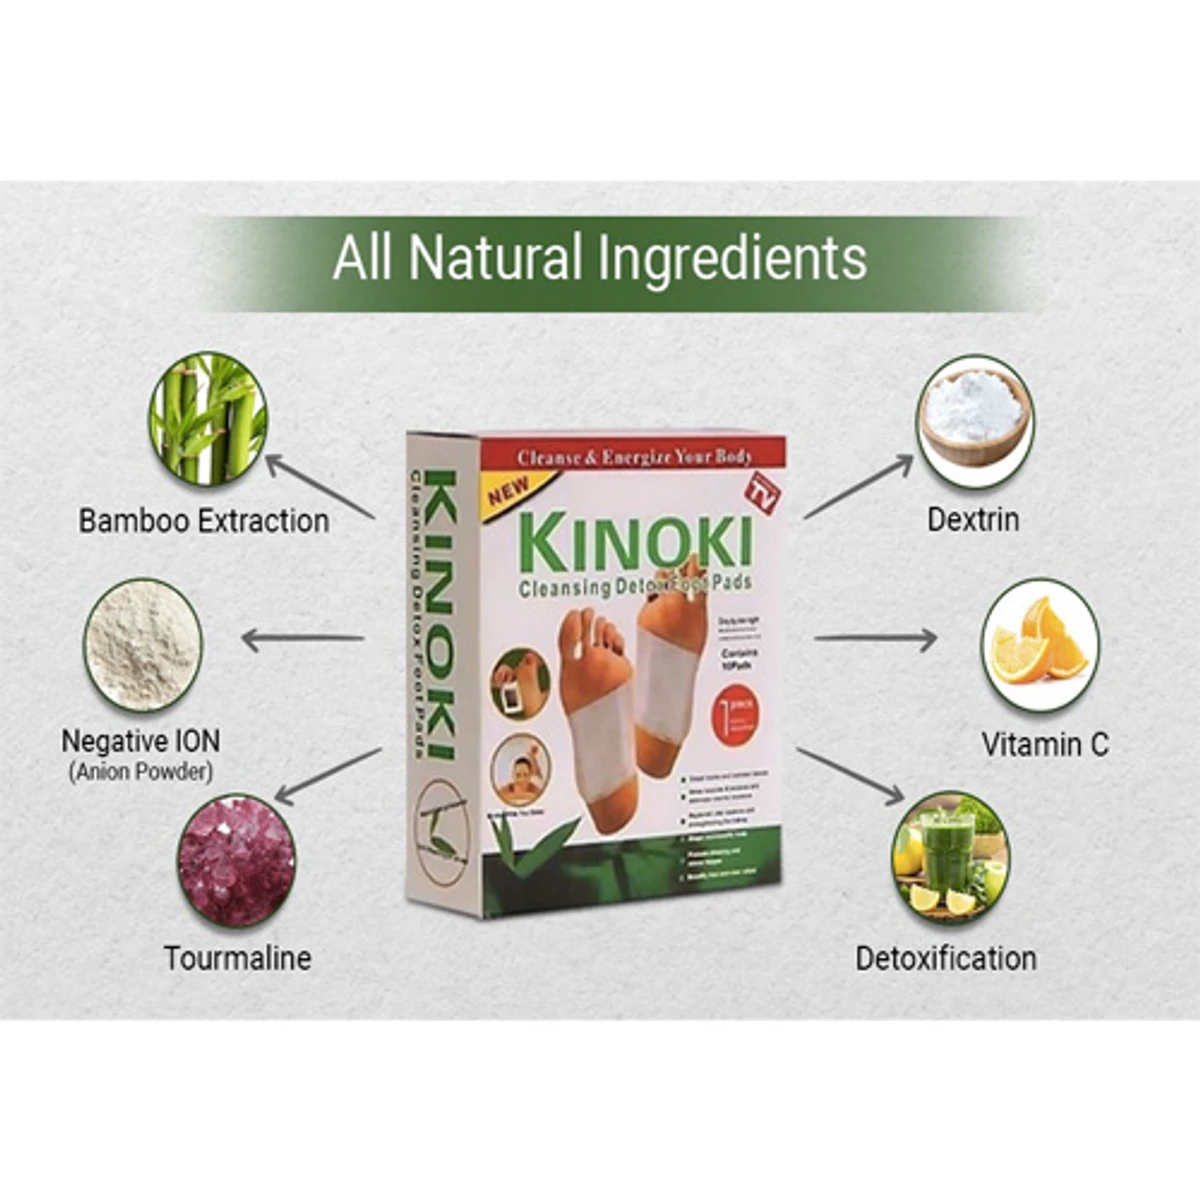 Full Course 5 Pack ( Free Delivery Charge ) Kinoki Detox Foot Pads